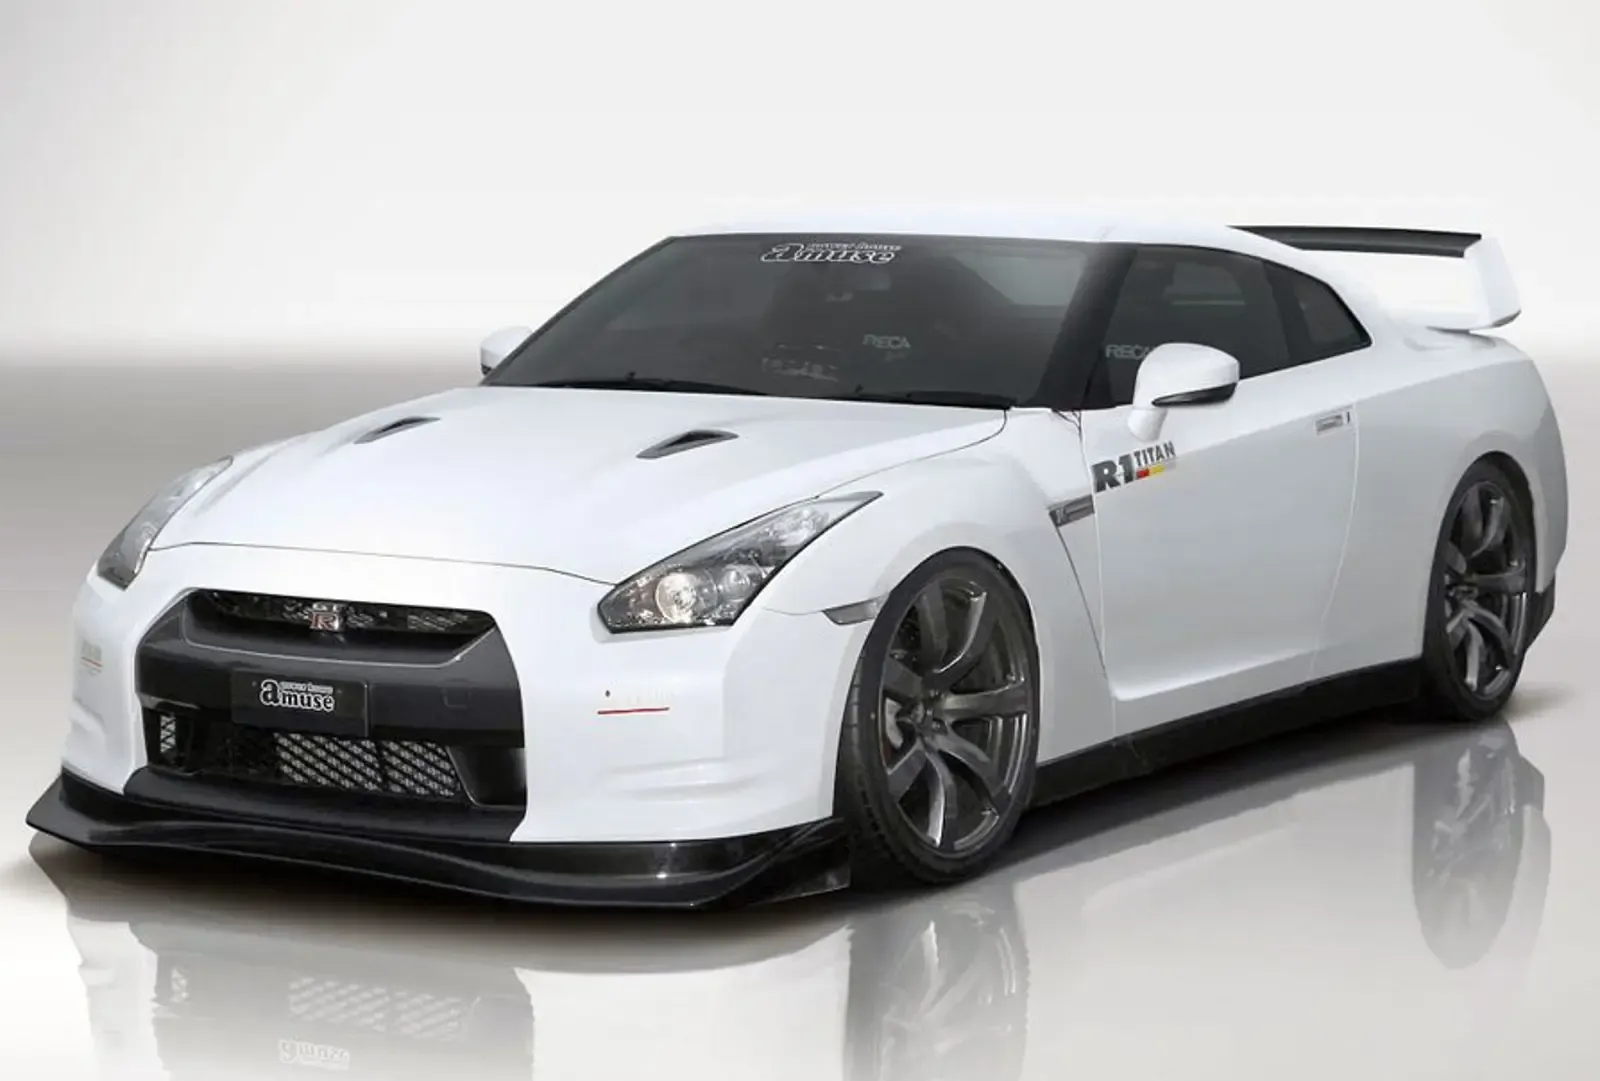 Nissan R35 GT-R by PowerHouse Amuse (White) - Front Left